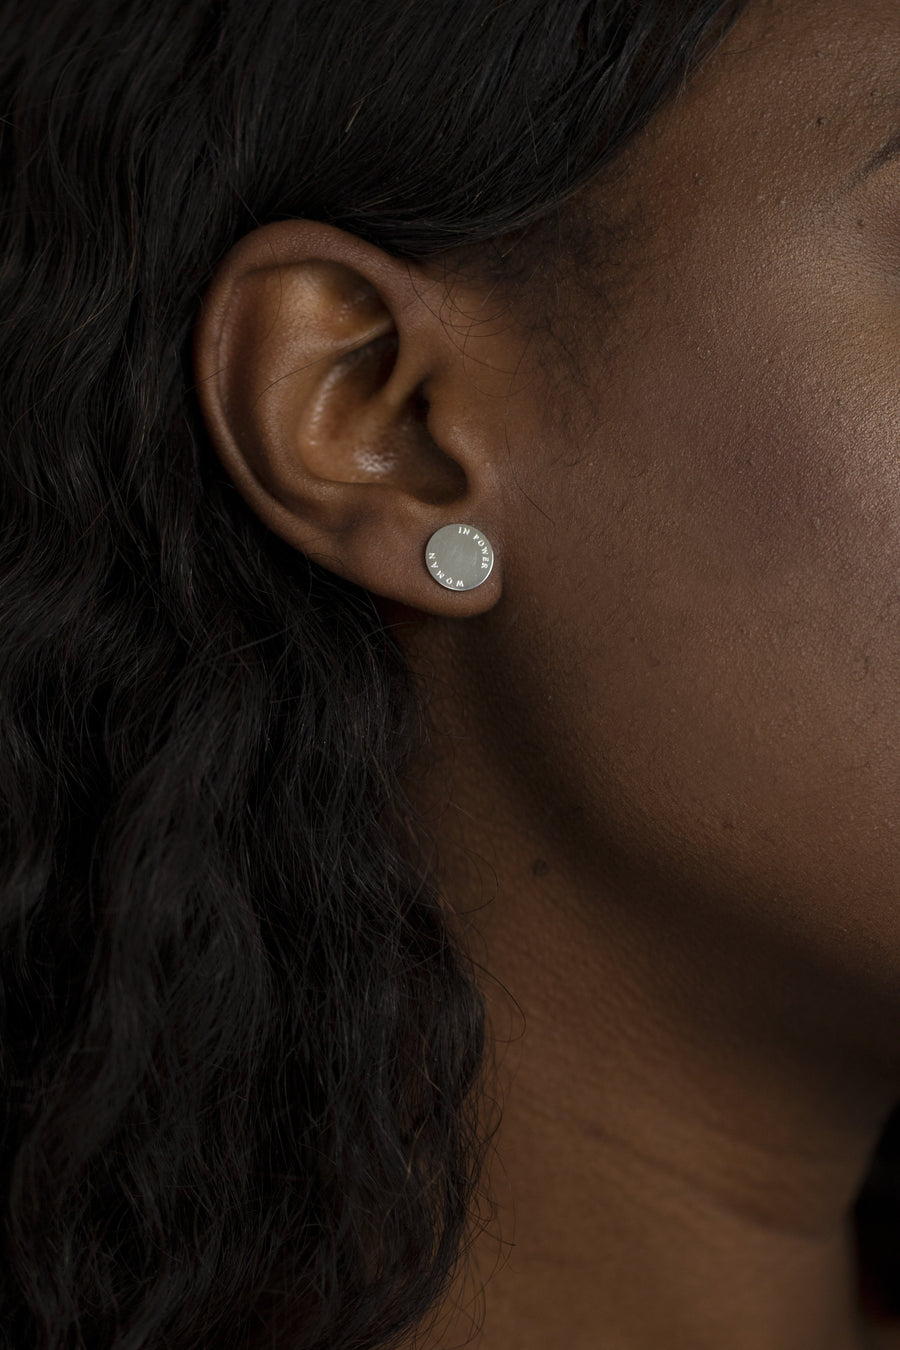 Woman In Power Studs Silver | Inspirational Jewellery